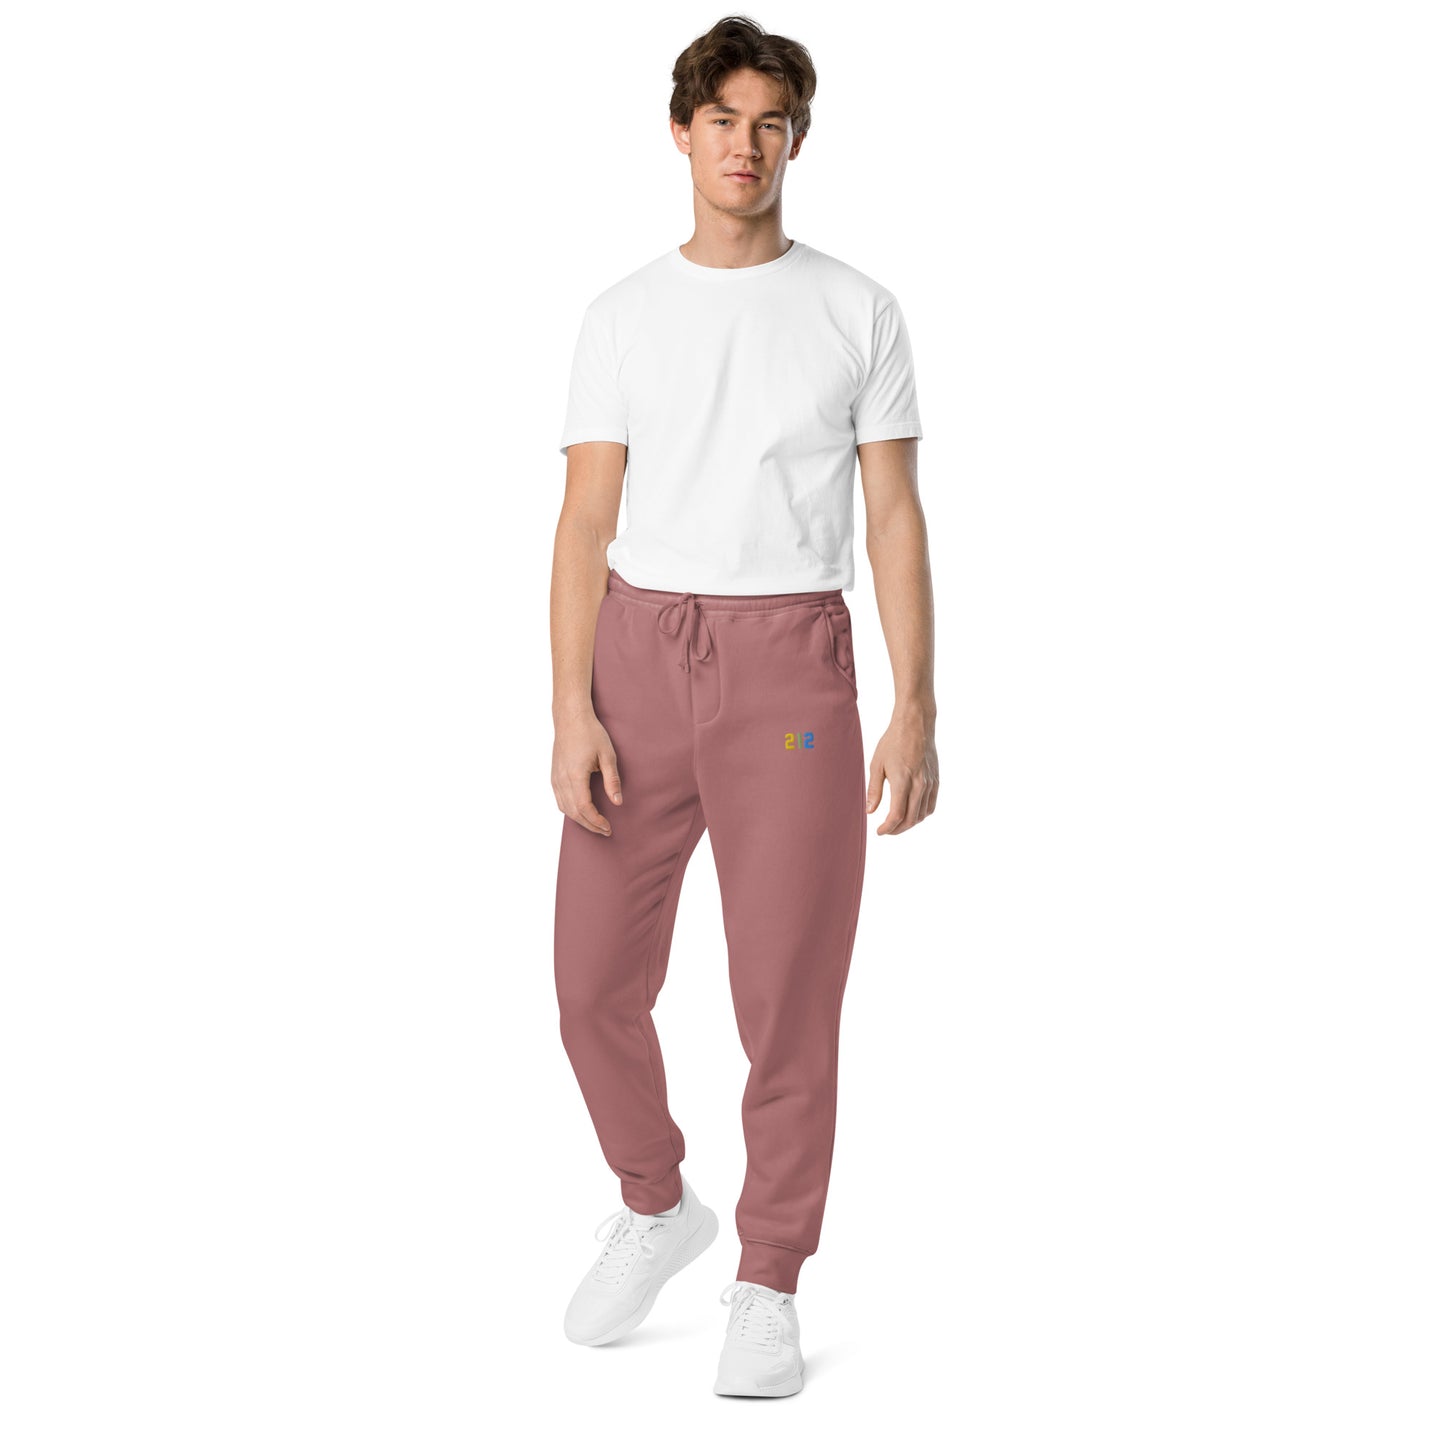 212 Multi Embroidered - Unisex pigment-dyed sweatpants